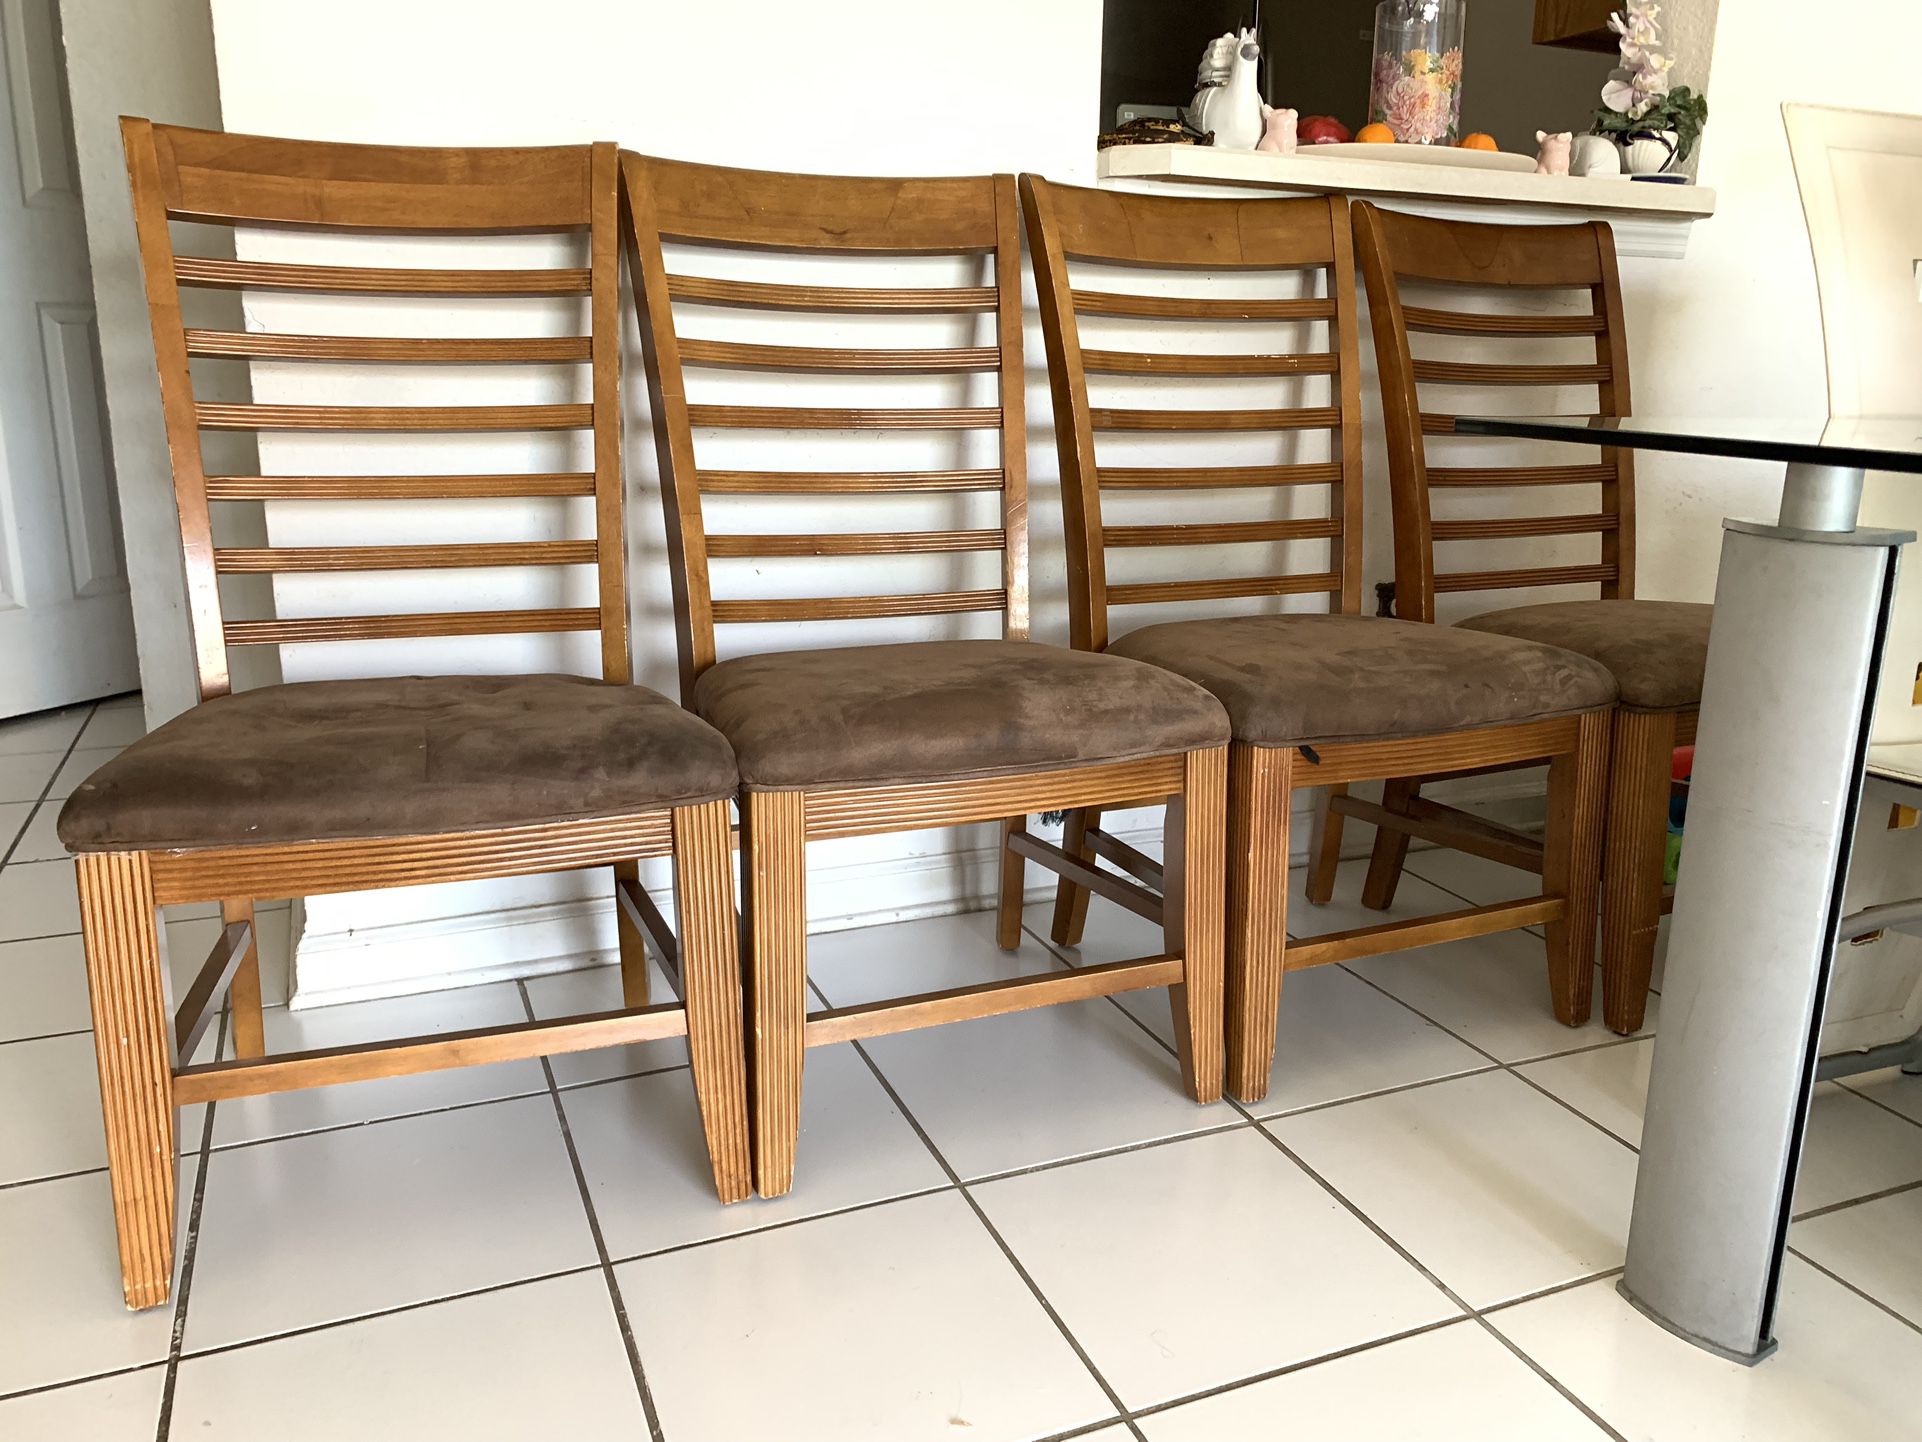 Dining Set $169 🎁🎄🎈🍀🚚 Chair, Table, Furniture, Dining And Kitchen Furniture Set, Wood Furniture, Brown, Breakfast, House Furniture And Decoration